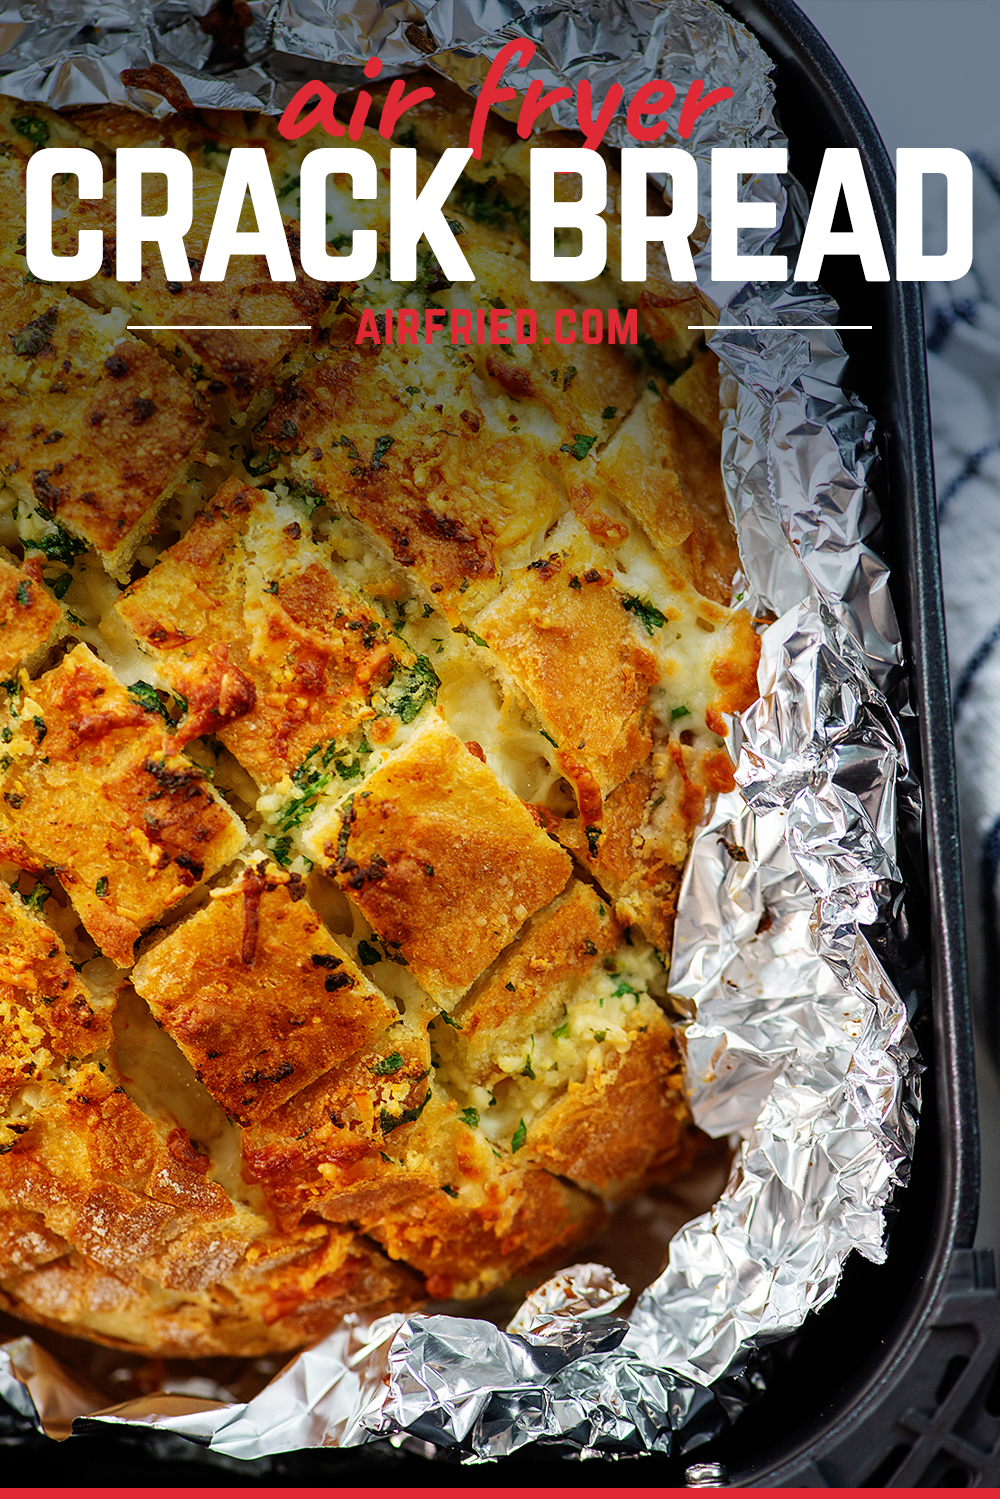 This cheesy garlic bread is so fun to make and even more fun to eat! Plus it's made in the air fryer!